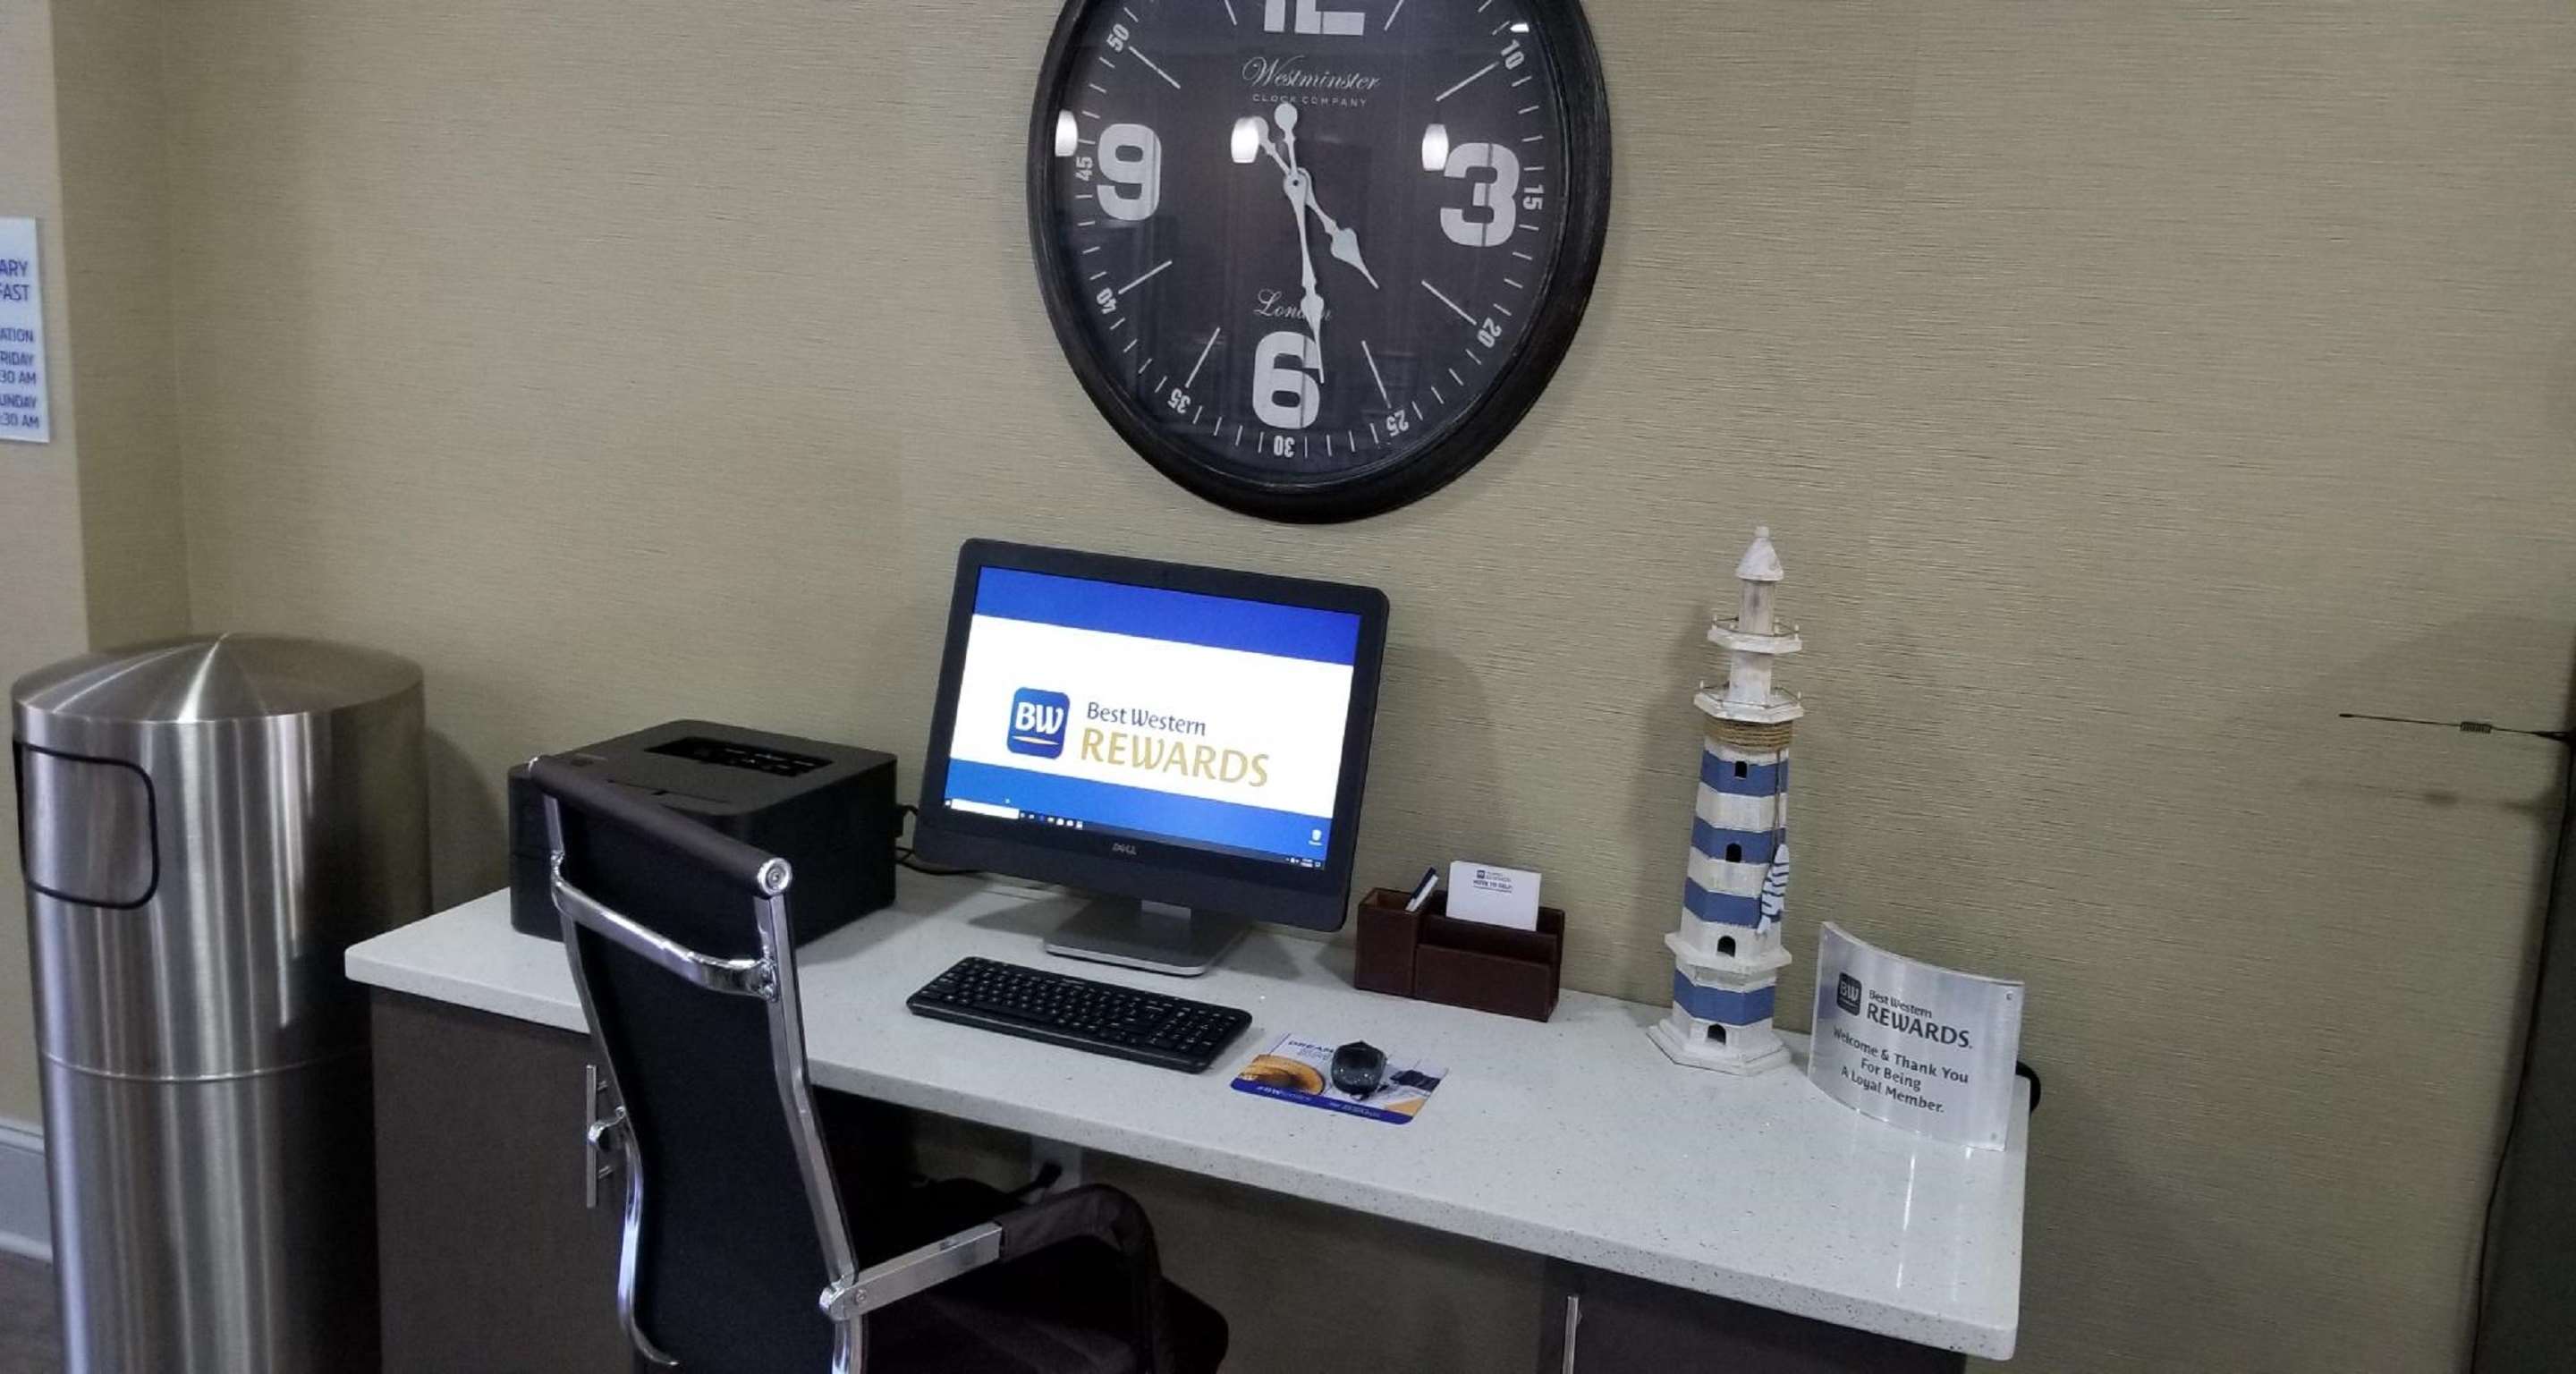 Catch up on emails at our 24 hr. Business Center Best Western Shallotte / Ocean Isle Beach Hotel Shallotte (910)754-3044